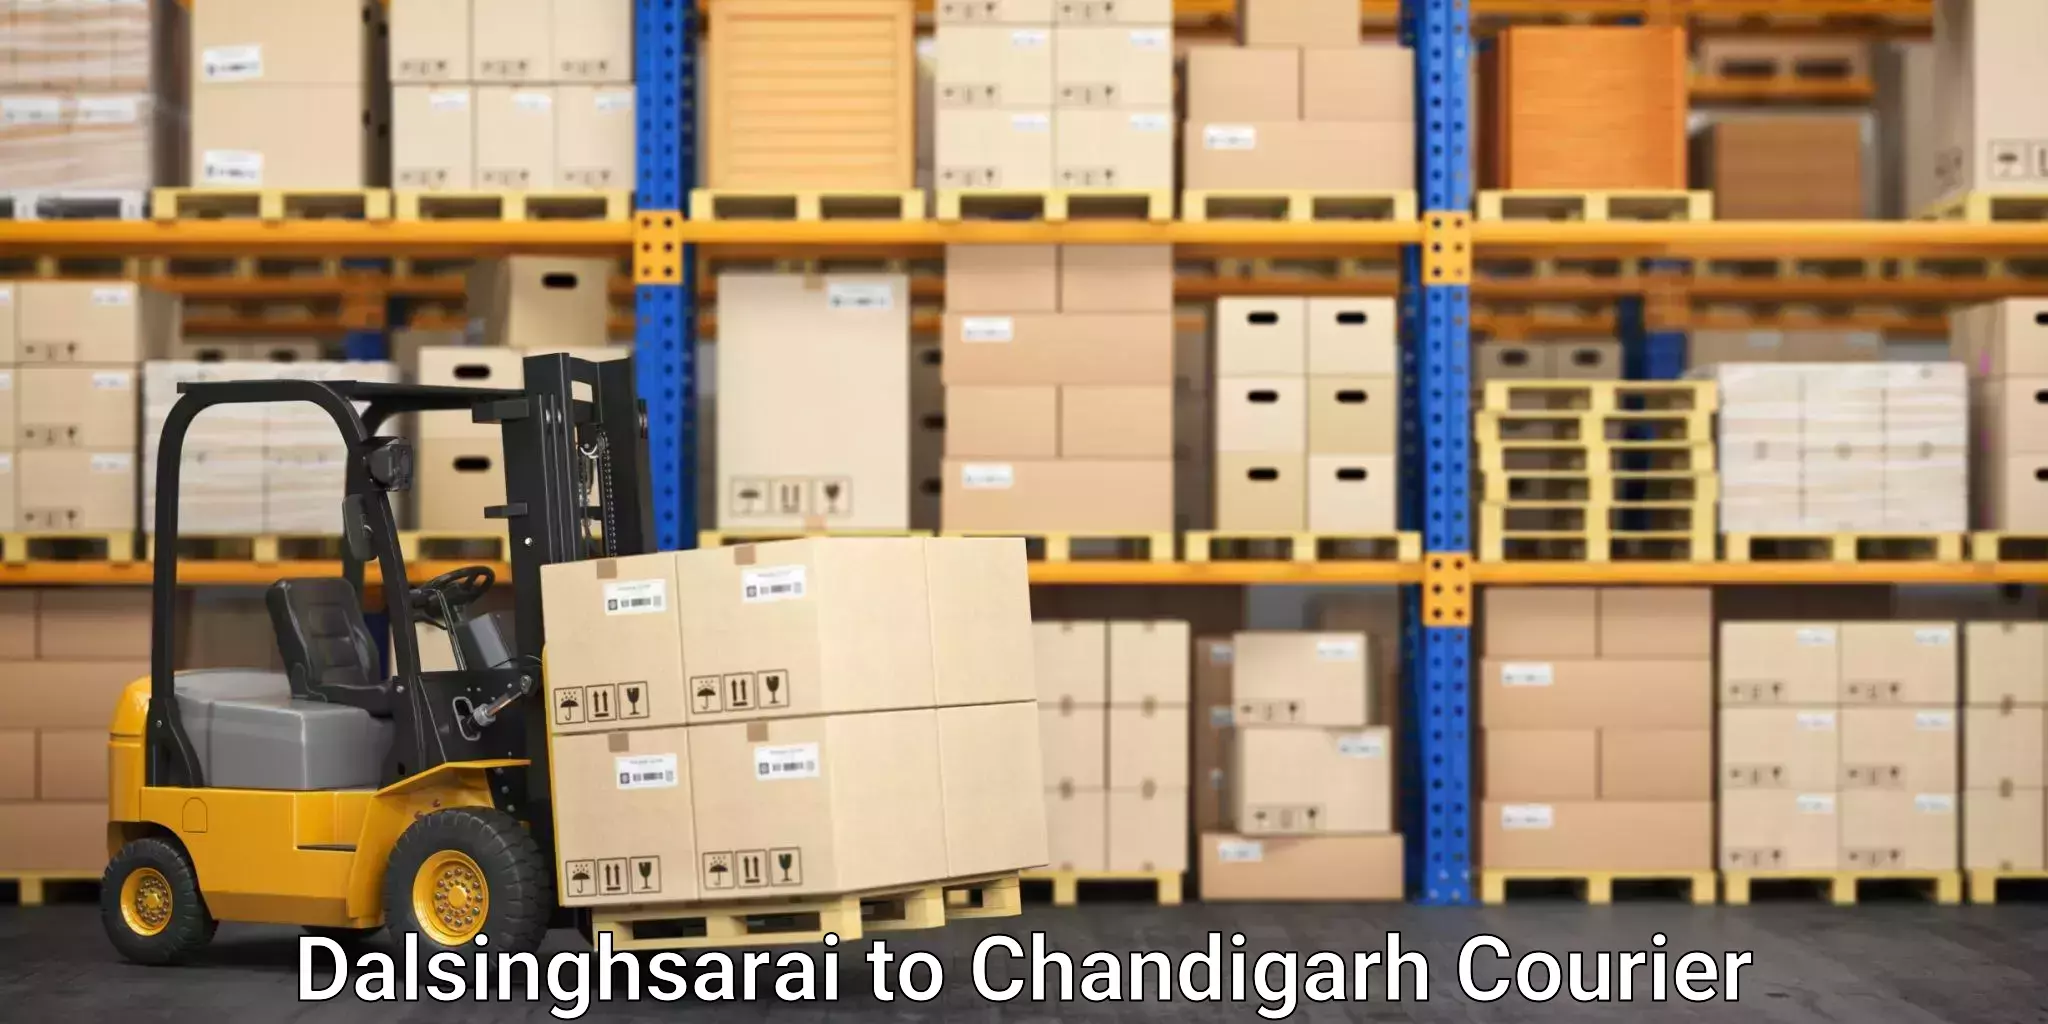 Residential furniture transport in Dalsinghsarai to Chandigarh